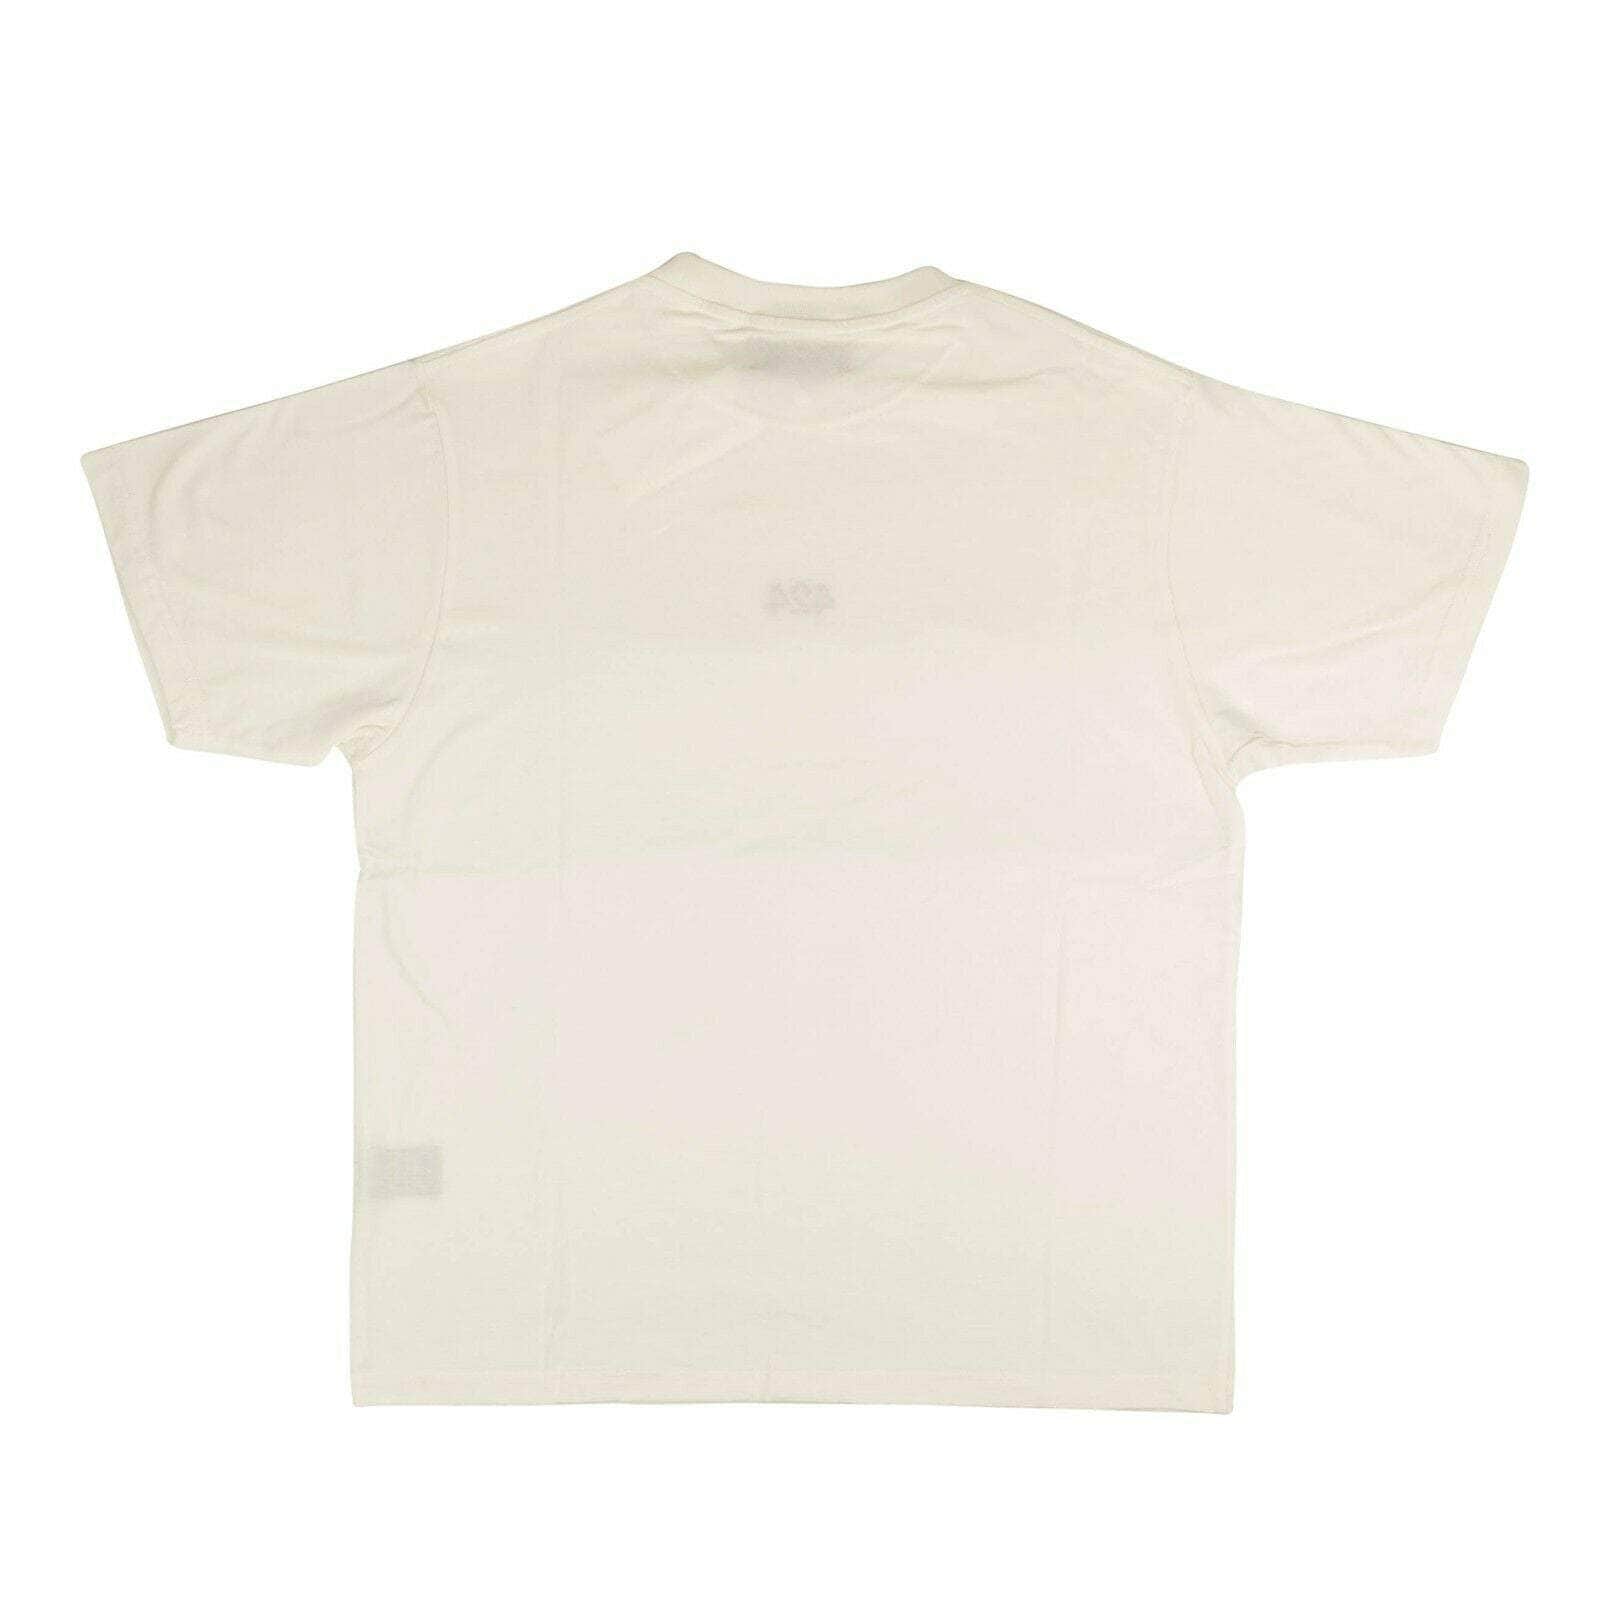 424 ON FAIRFAX 424-on-fairfax, channelenable-all, chicmi, couponcollection, gender-mens, main-clothing, mens-shoes, size-l, size-m, size-s, size-xl, size-xs, under-250 White Logo Cotton Short Sleeve T-Shirt